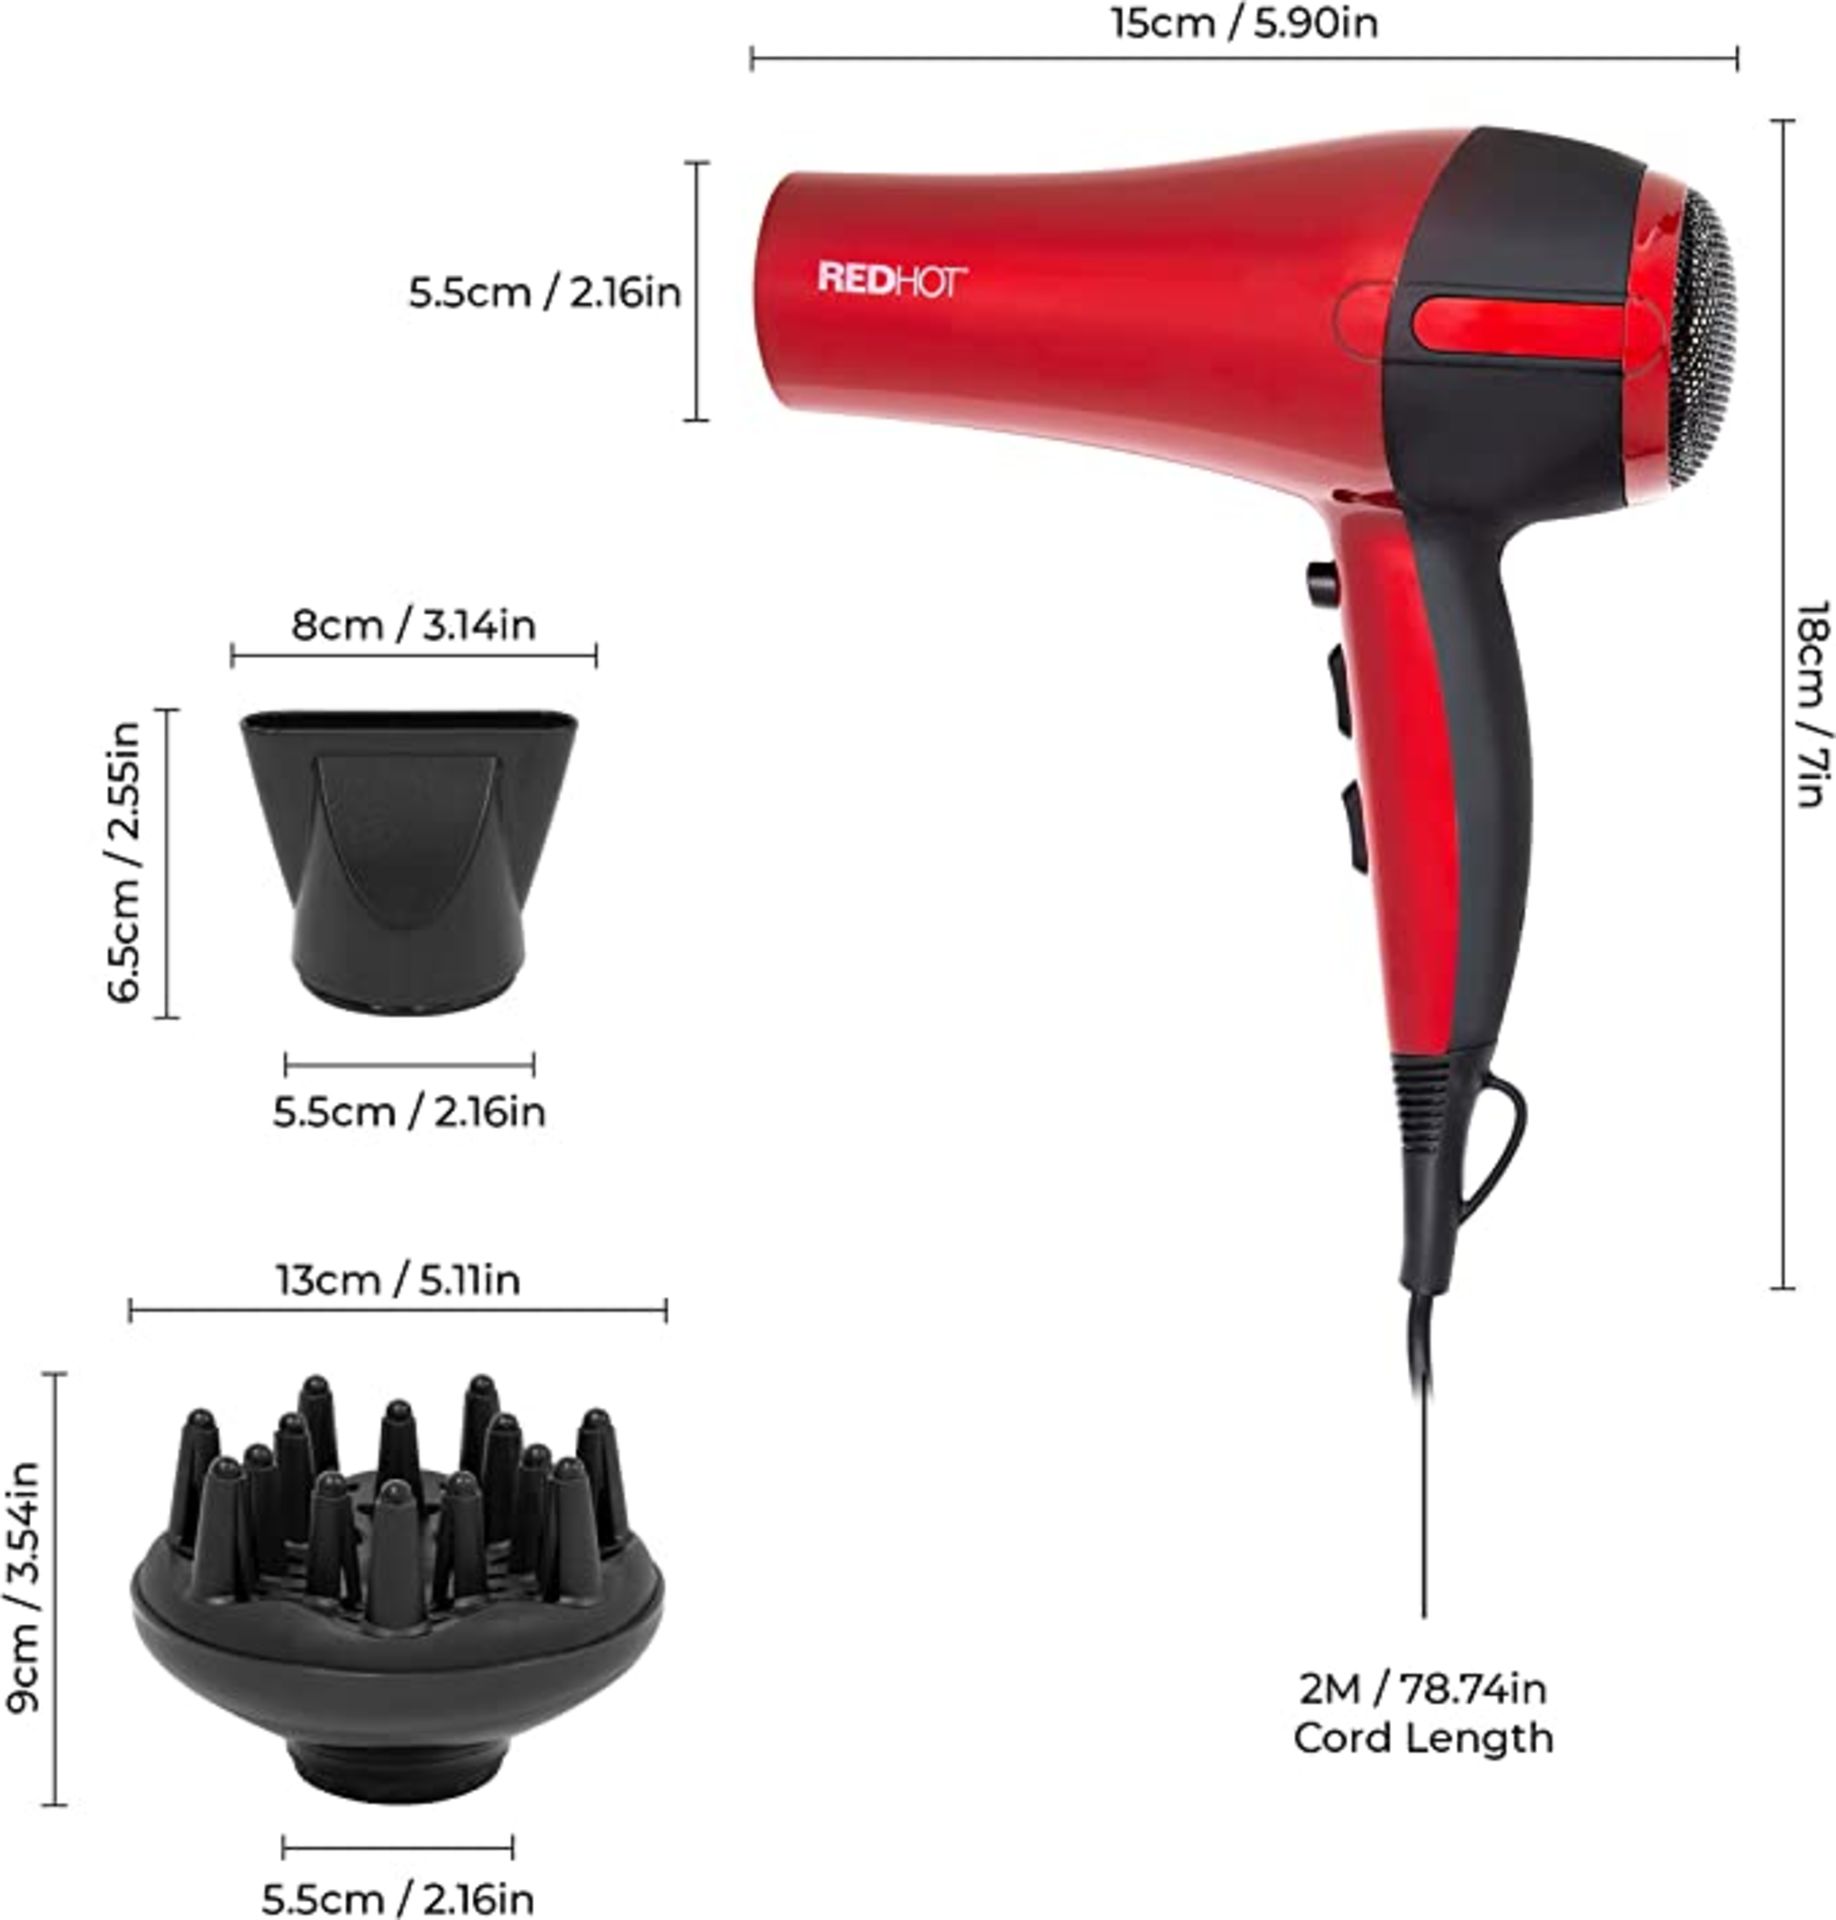 Red Hot 37010 2200W Professional Hair Dryer Dual Styling Options / 3 Heat Settings, 2 Speed Settings